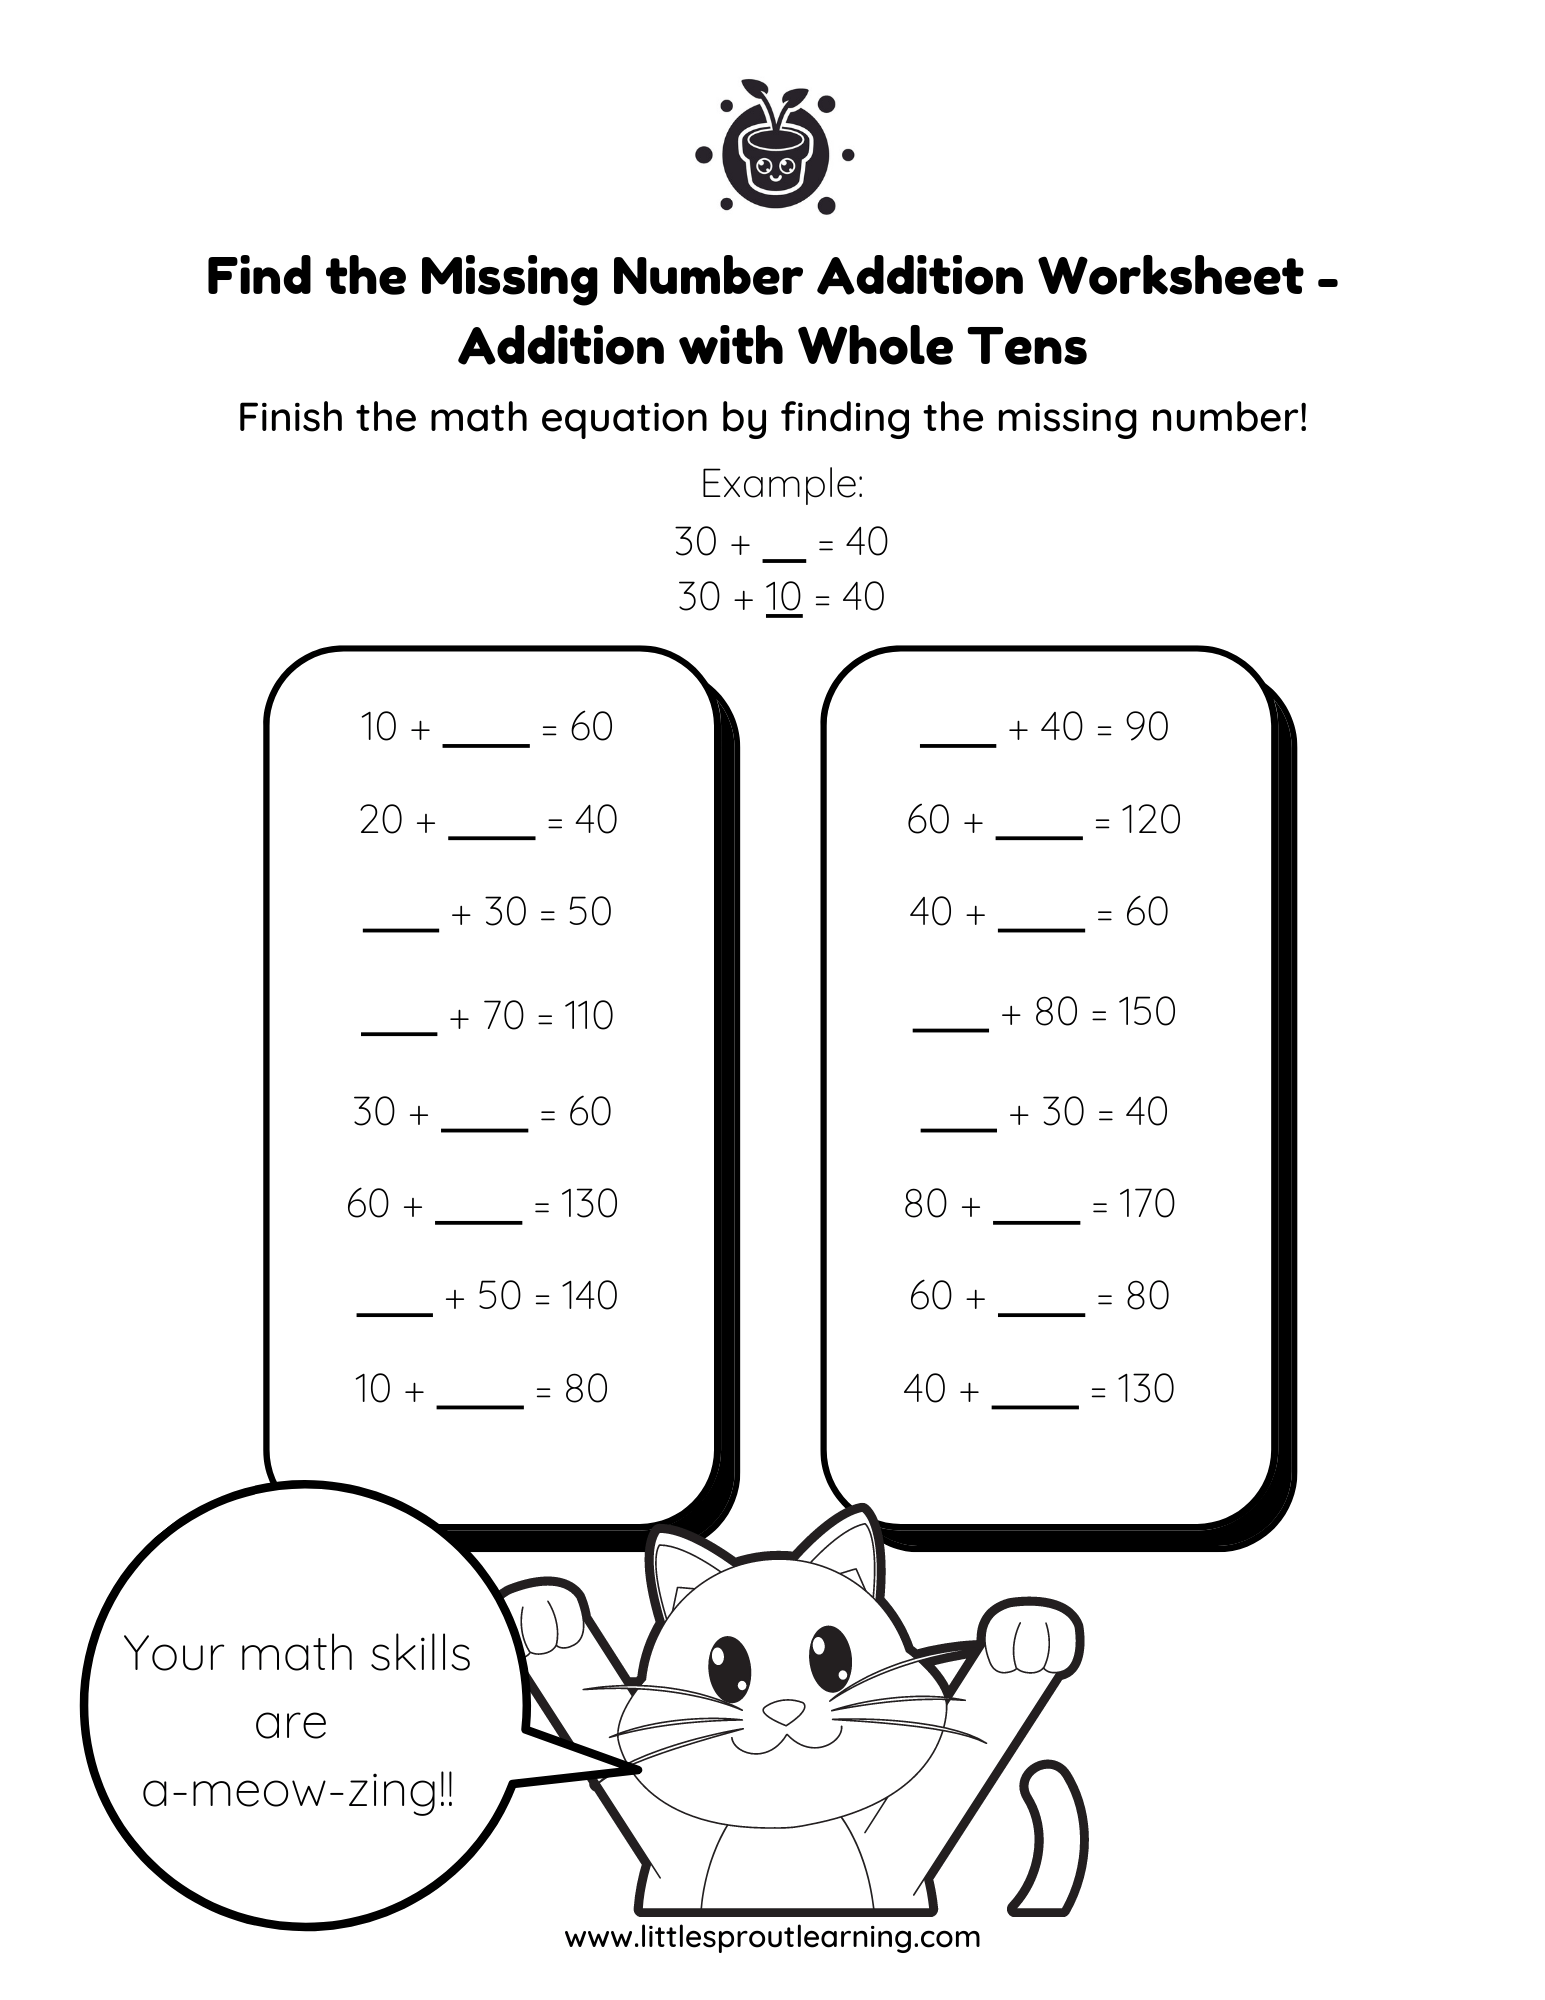 Find the Missing Number Addition With Whole Tens